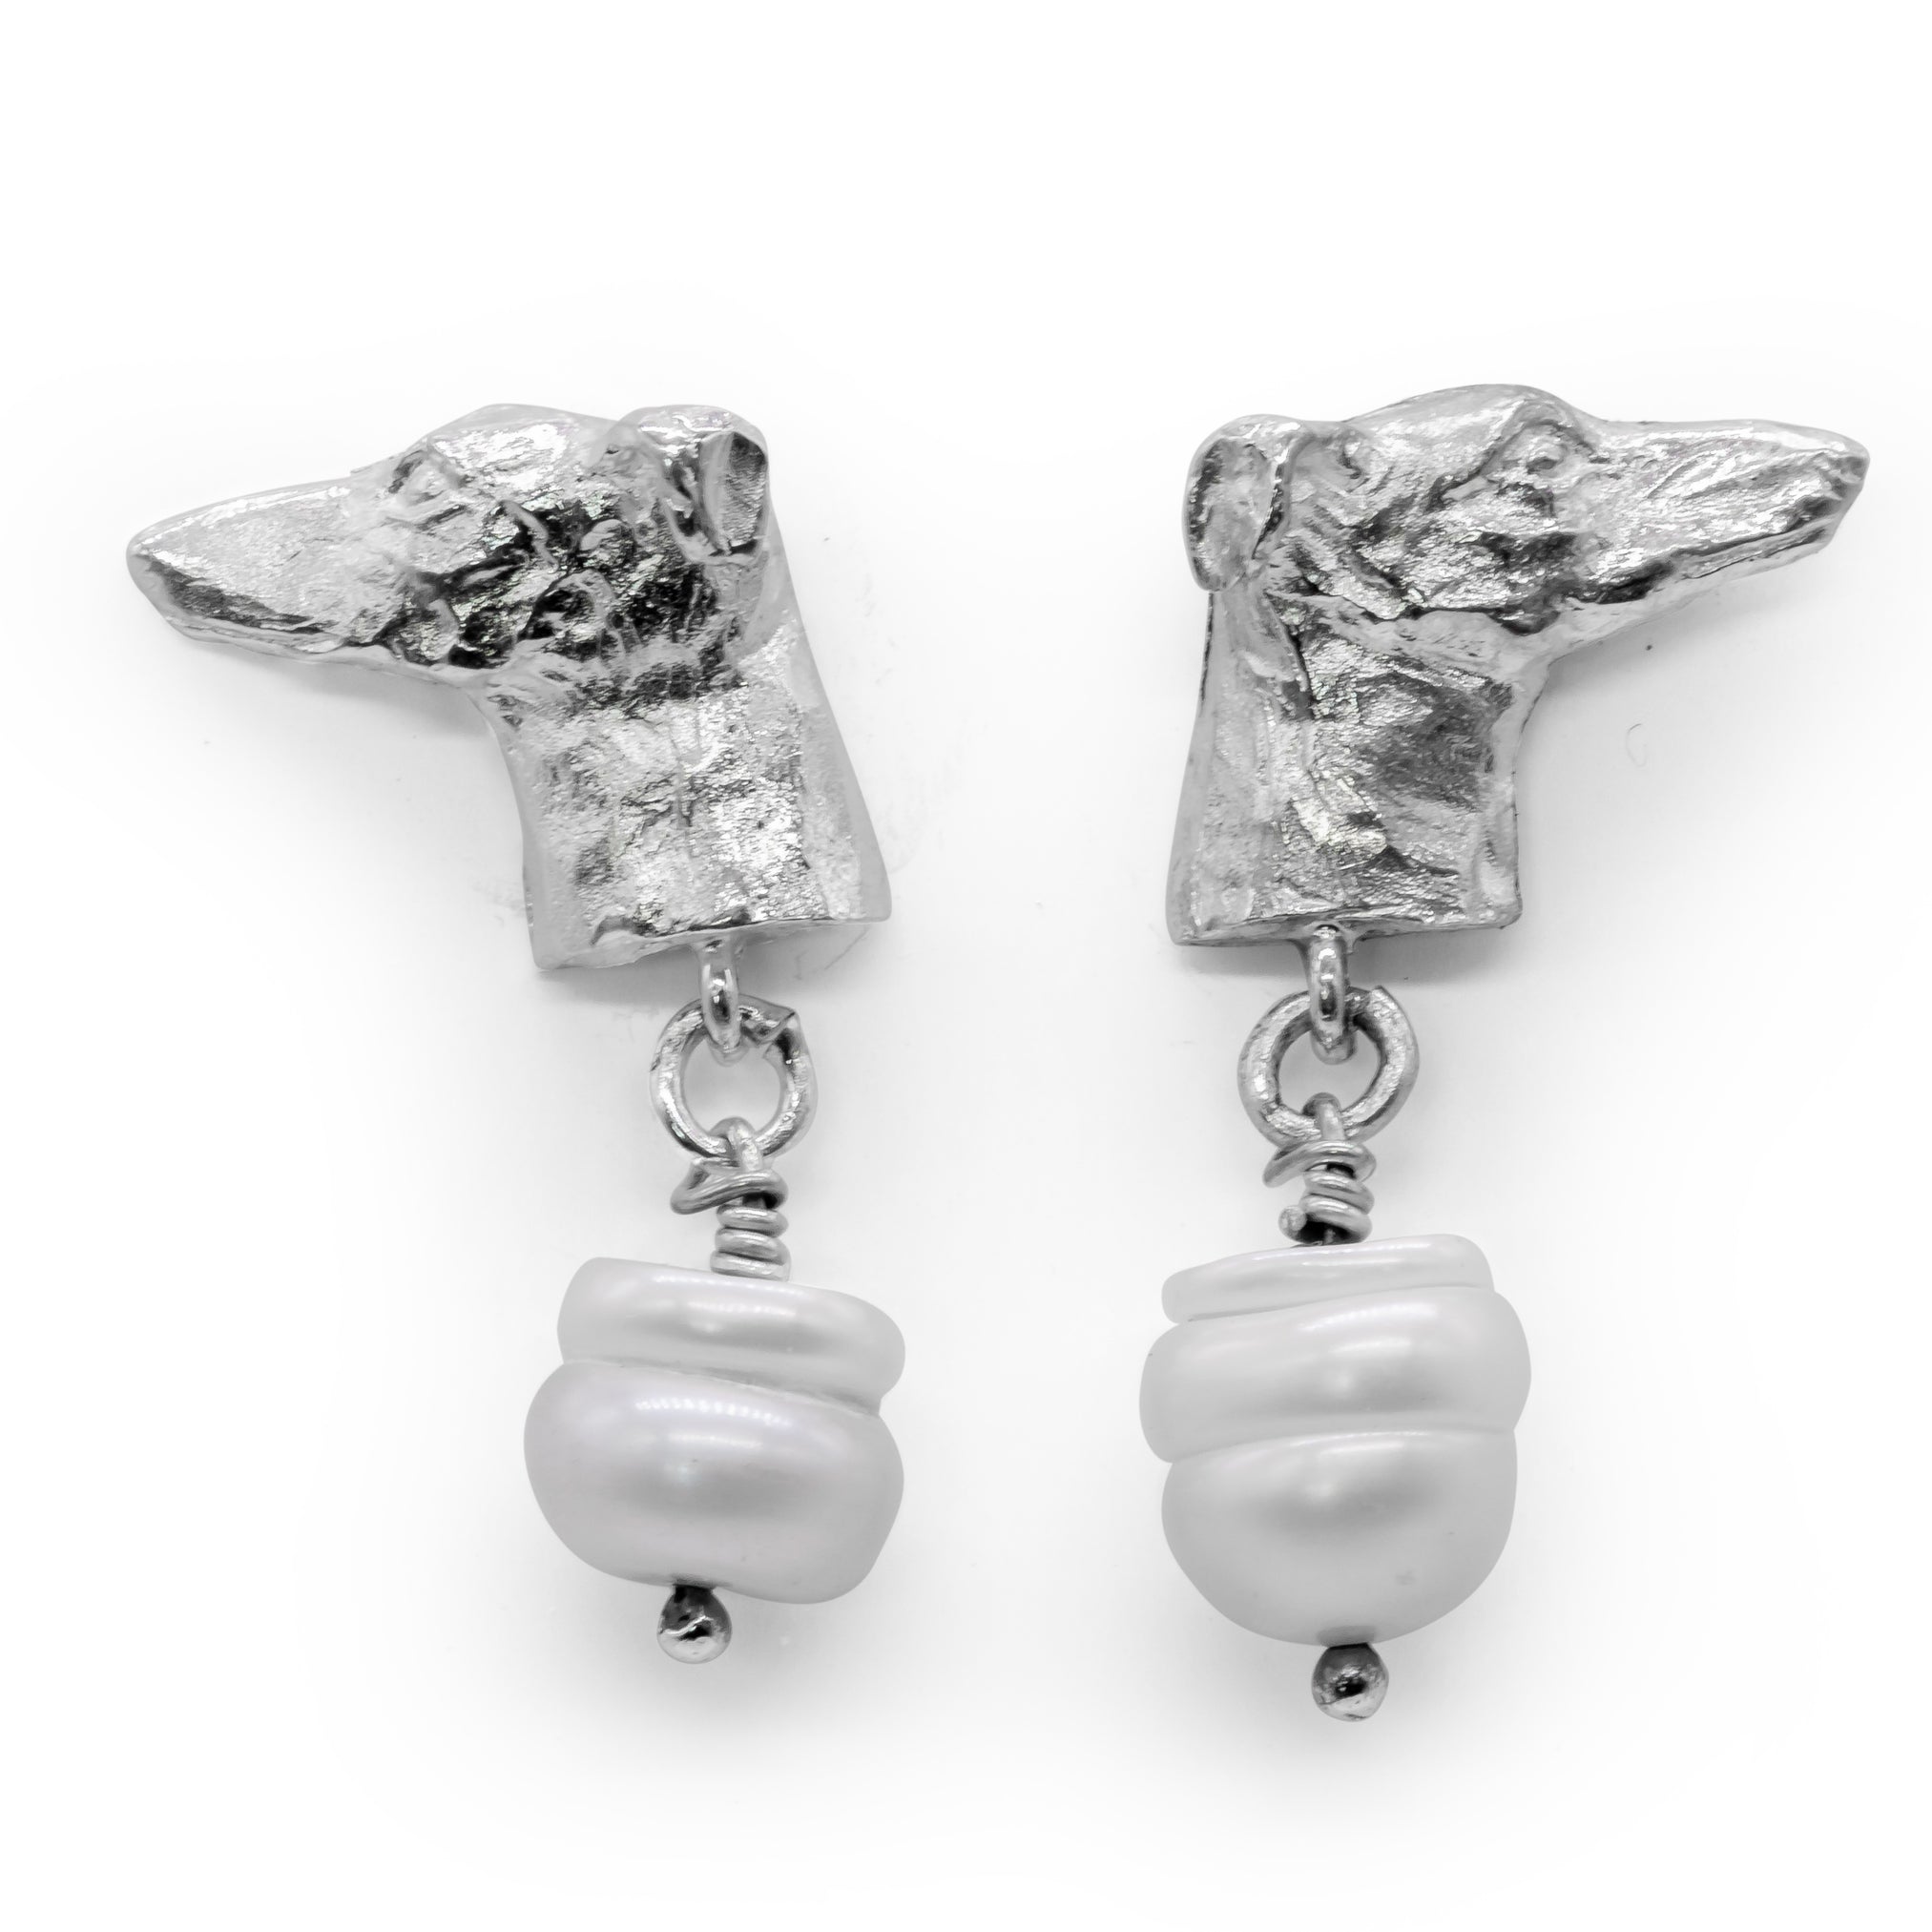 Greyhound stud earrings with freshwater pearl drops